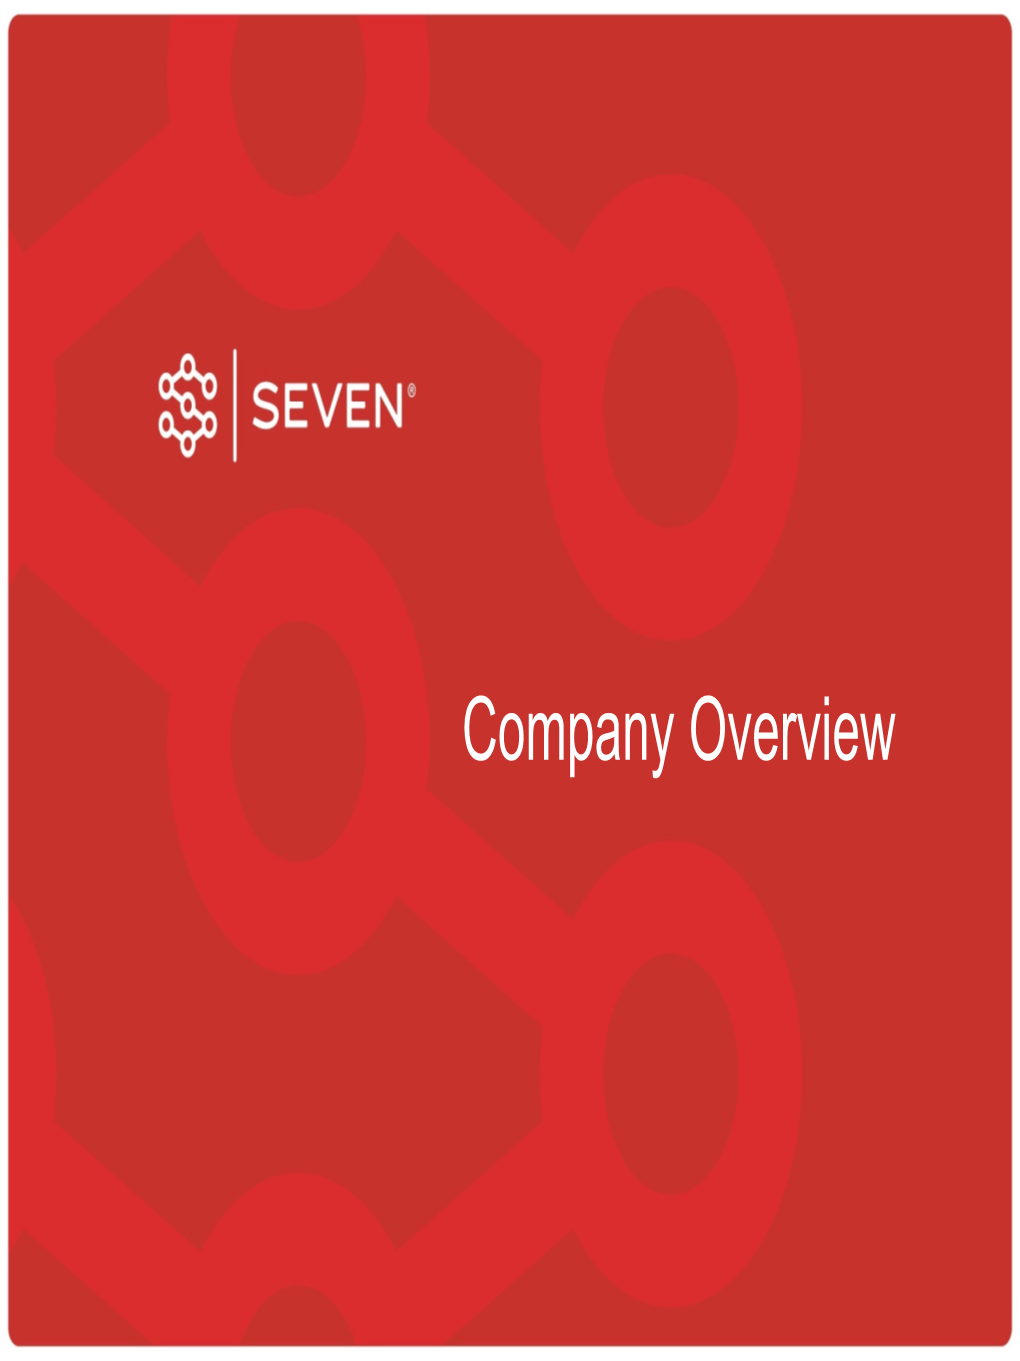 Company Overview About SEVEN